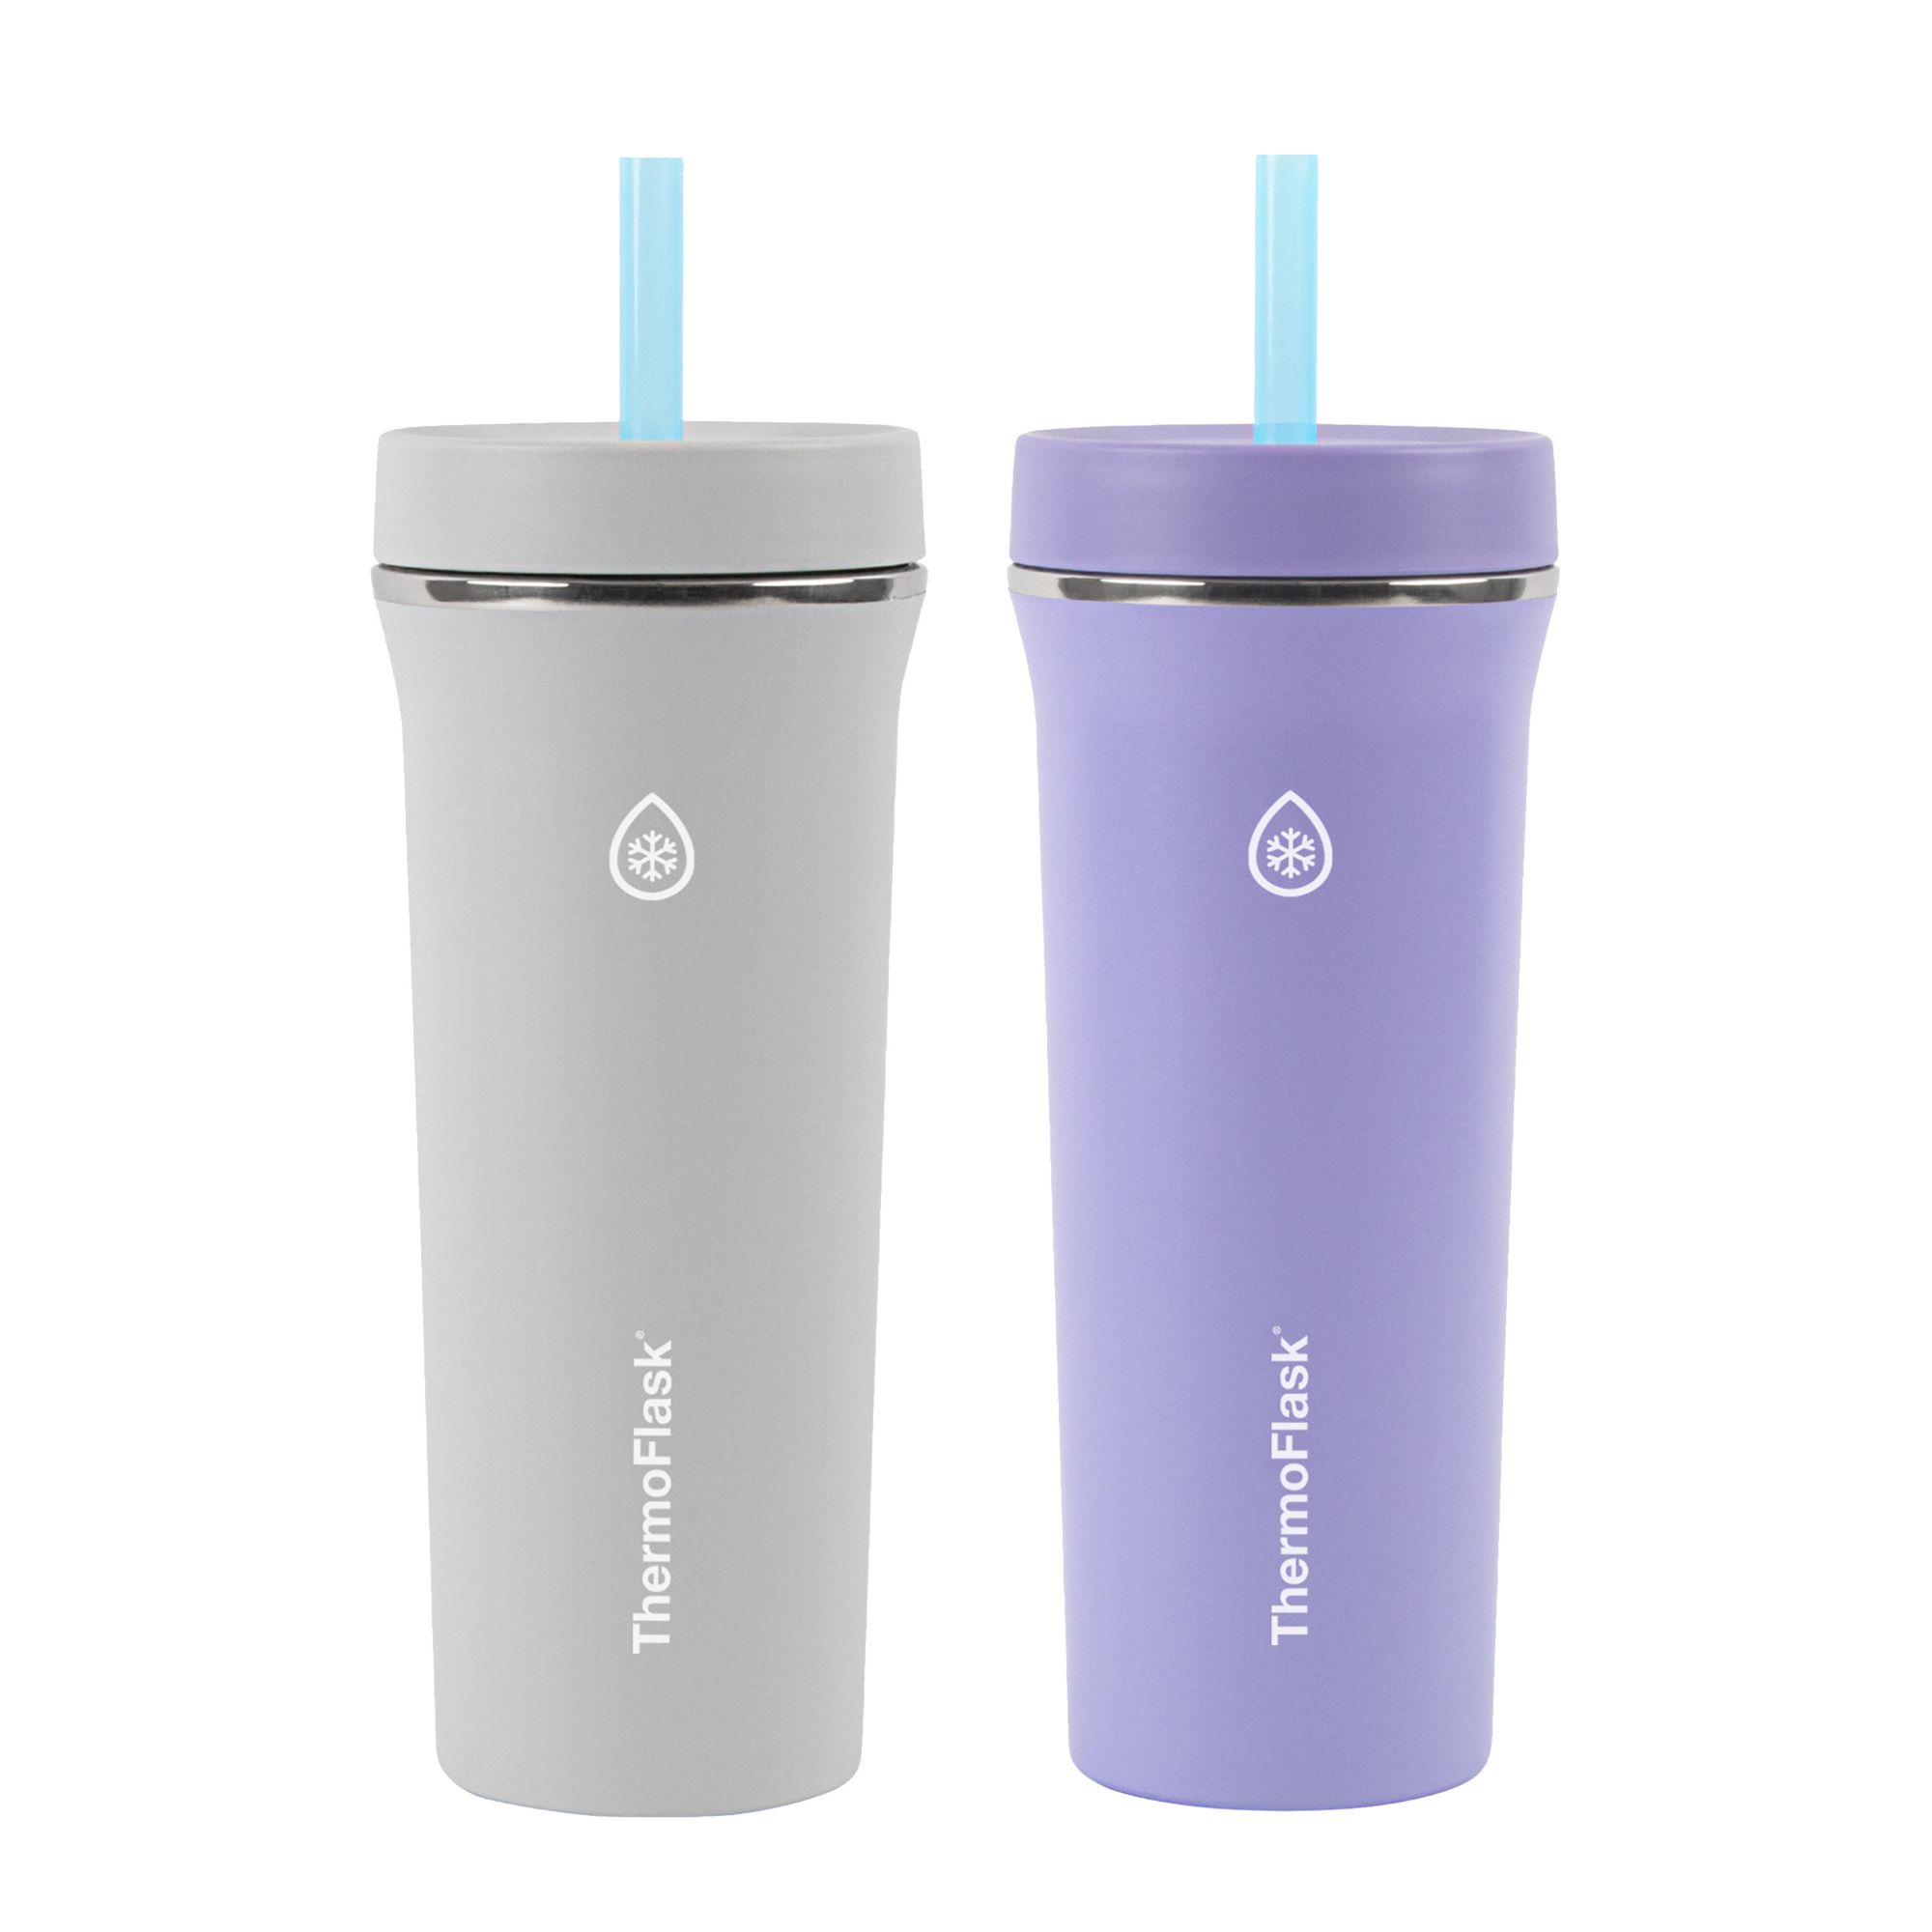  Thermoflask 32oz Insulated Standard Straw Tumbler, 2-Pack,  Black/Teal Green : Home & Kitchen